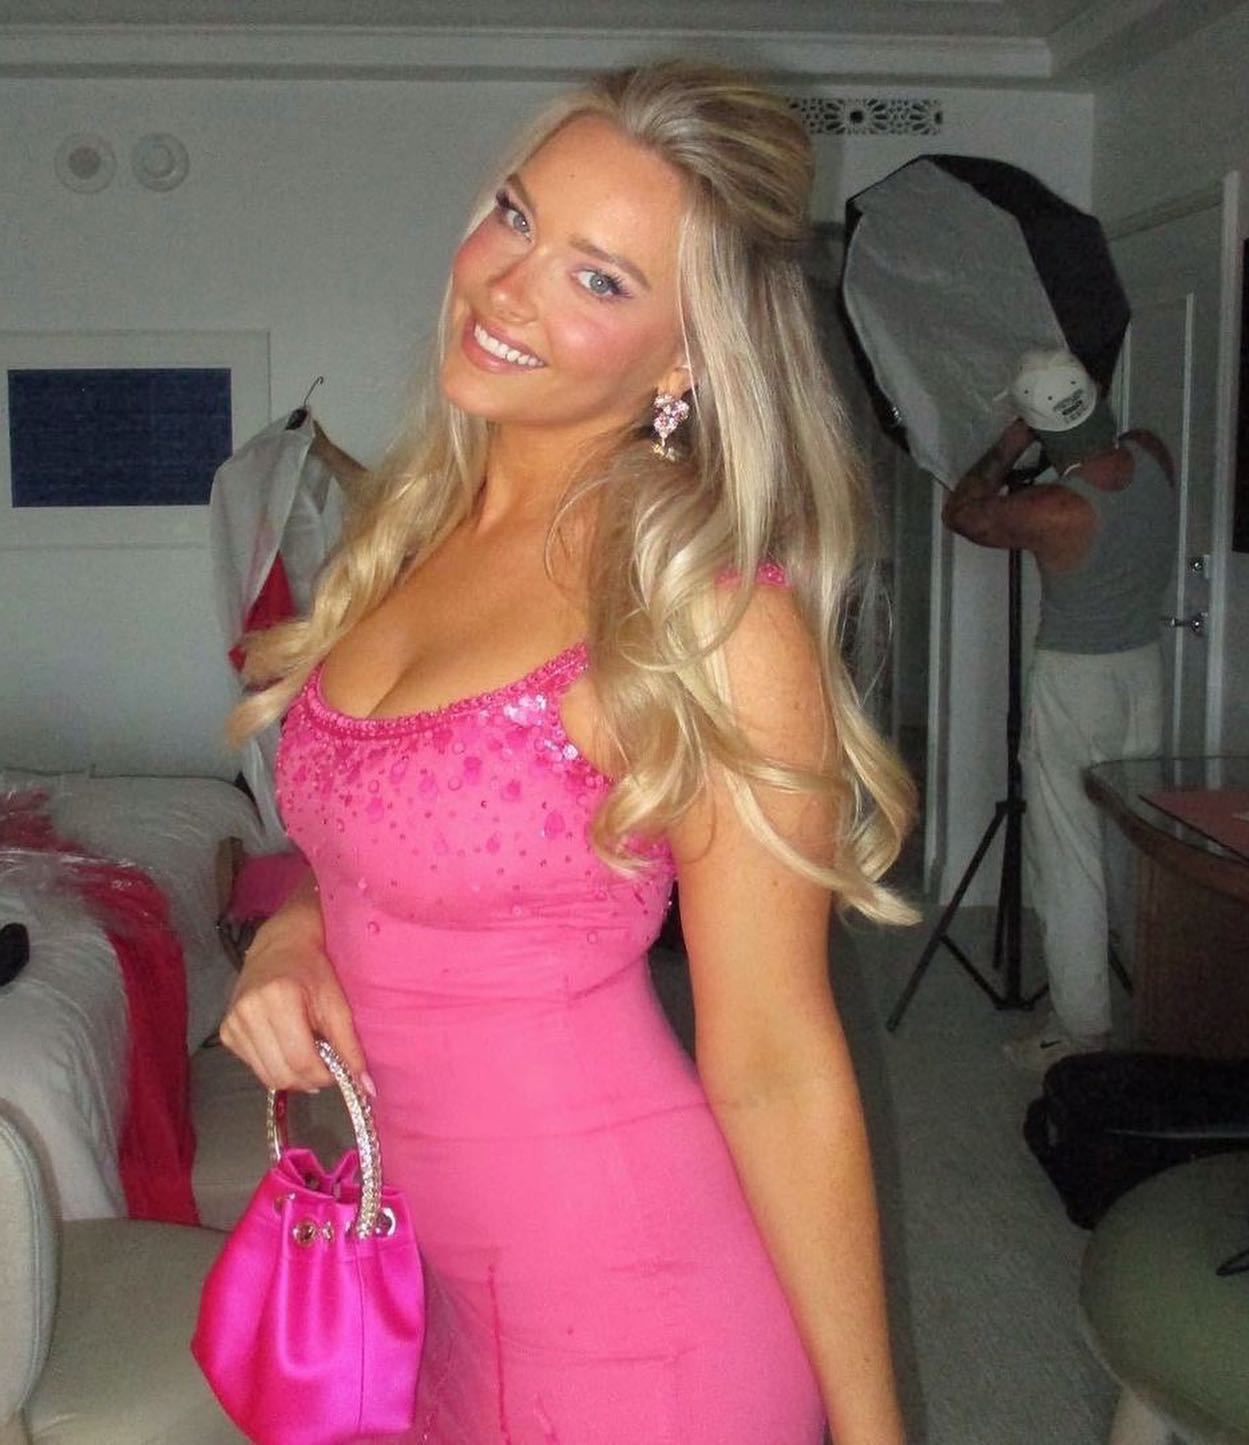 Photos n°4 : Camille Kostek and The Gronk are Barbie and Ken!